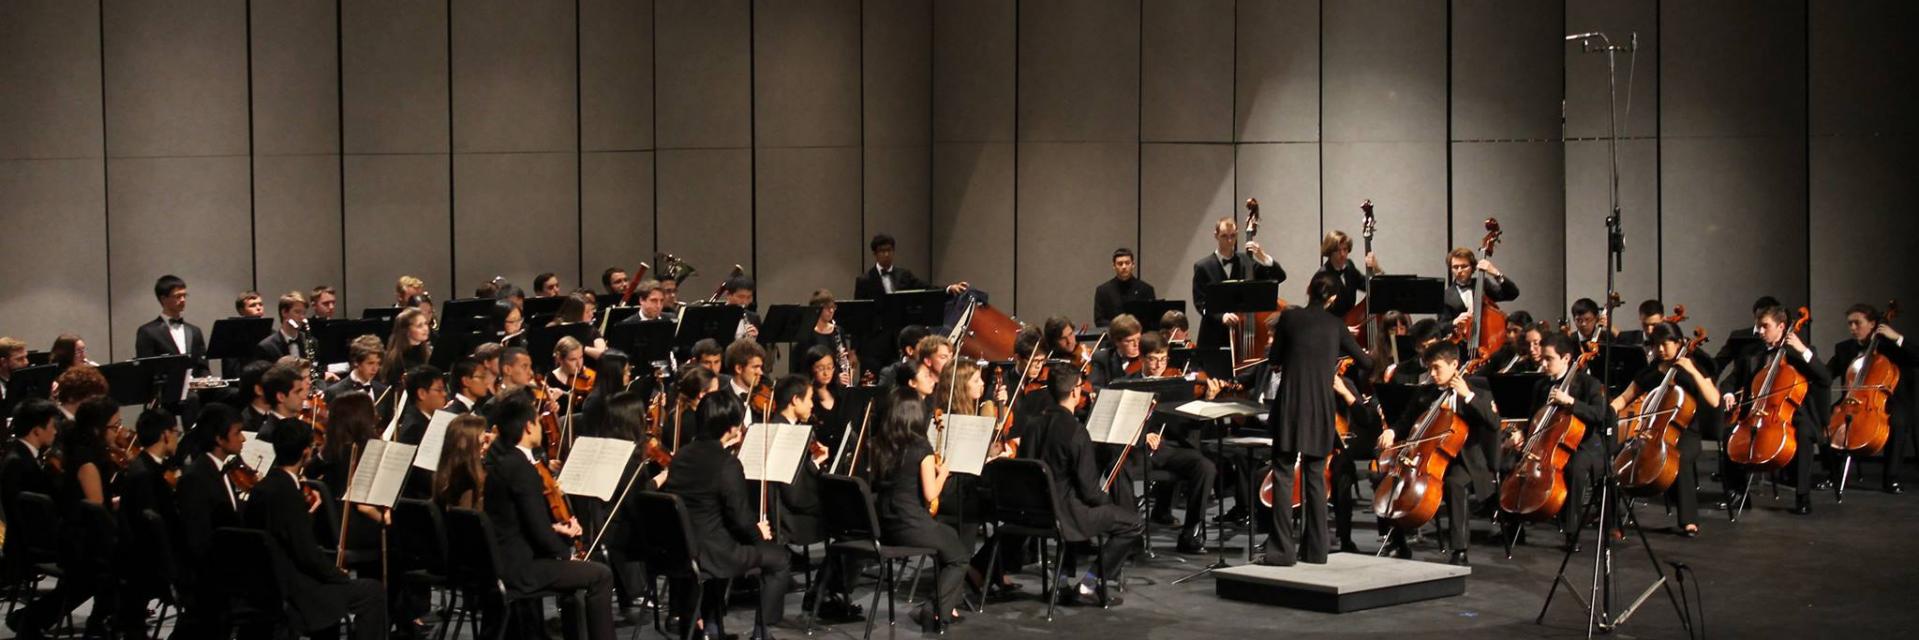 The Georgia Tech Symphony Orchestra performing on stage at the Ferst Center for the Arts.